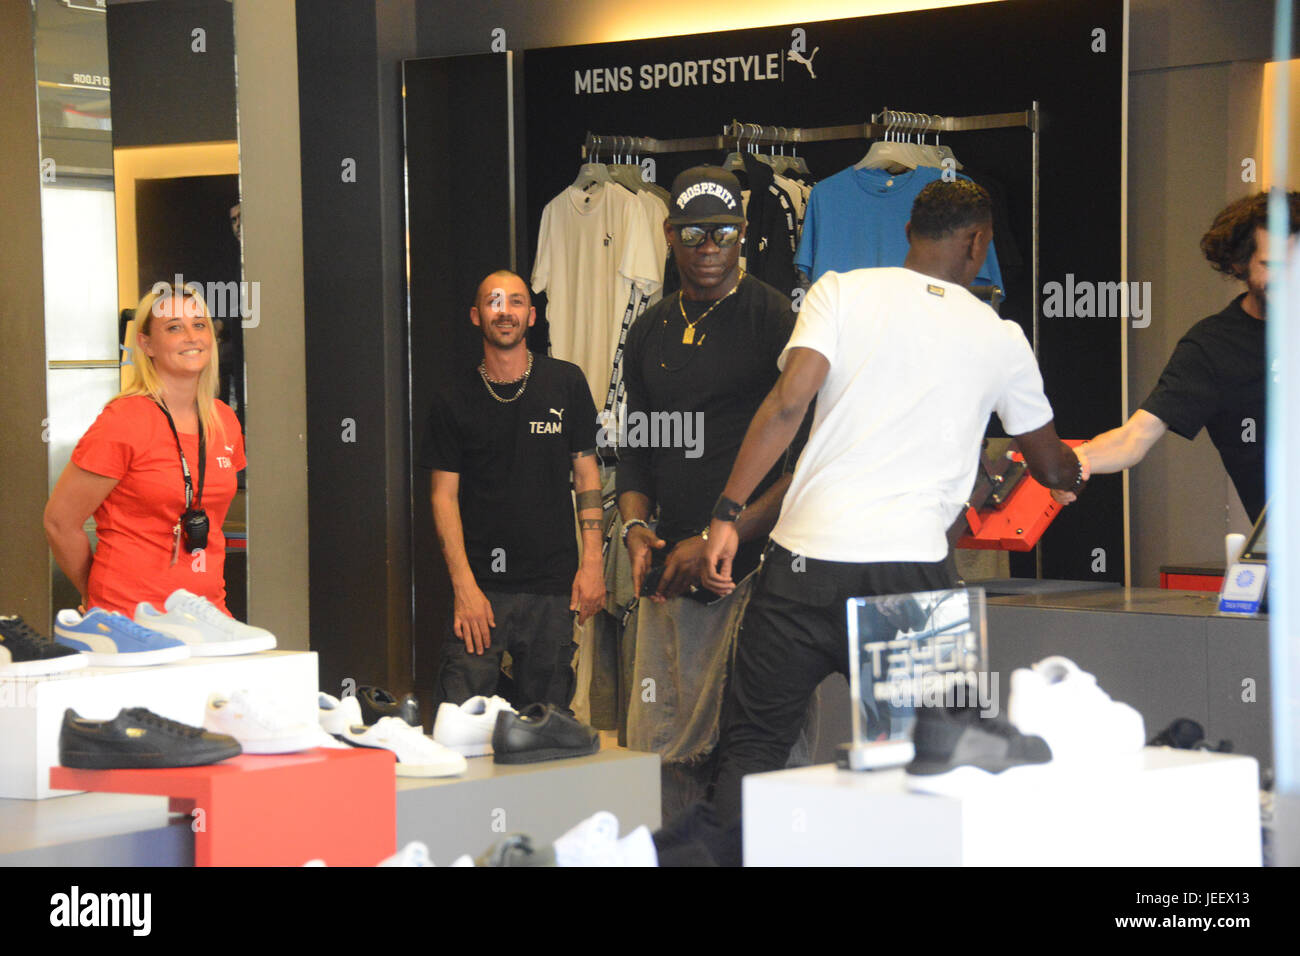 Mario Balotelli out shopping at the Puma store in Milan with his brother  Enock Barwuah. Mario Balotelli arrived in his new Alfa Romeo Giulia car.  Featuring: Mario Balotelli, Enock Barwuah Where: Milan,